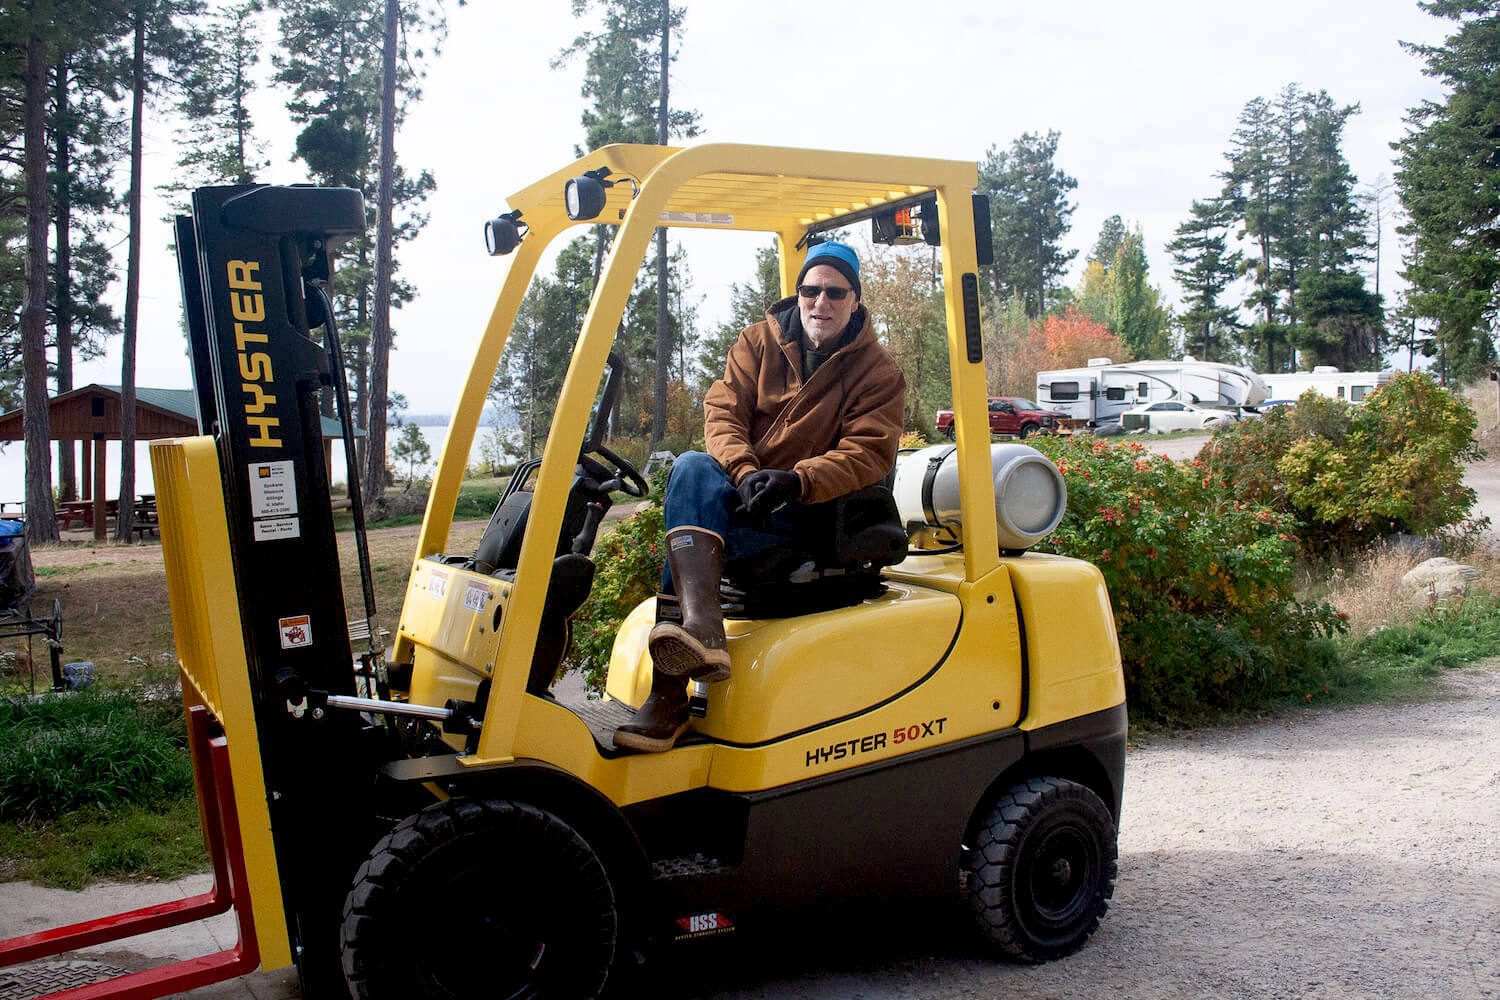 Barry Hansen the fisheries biologist for the CSKT sits on a yellow tractor wearing a brown coat, blue beanie, and boots. November 2021